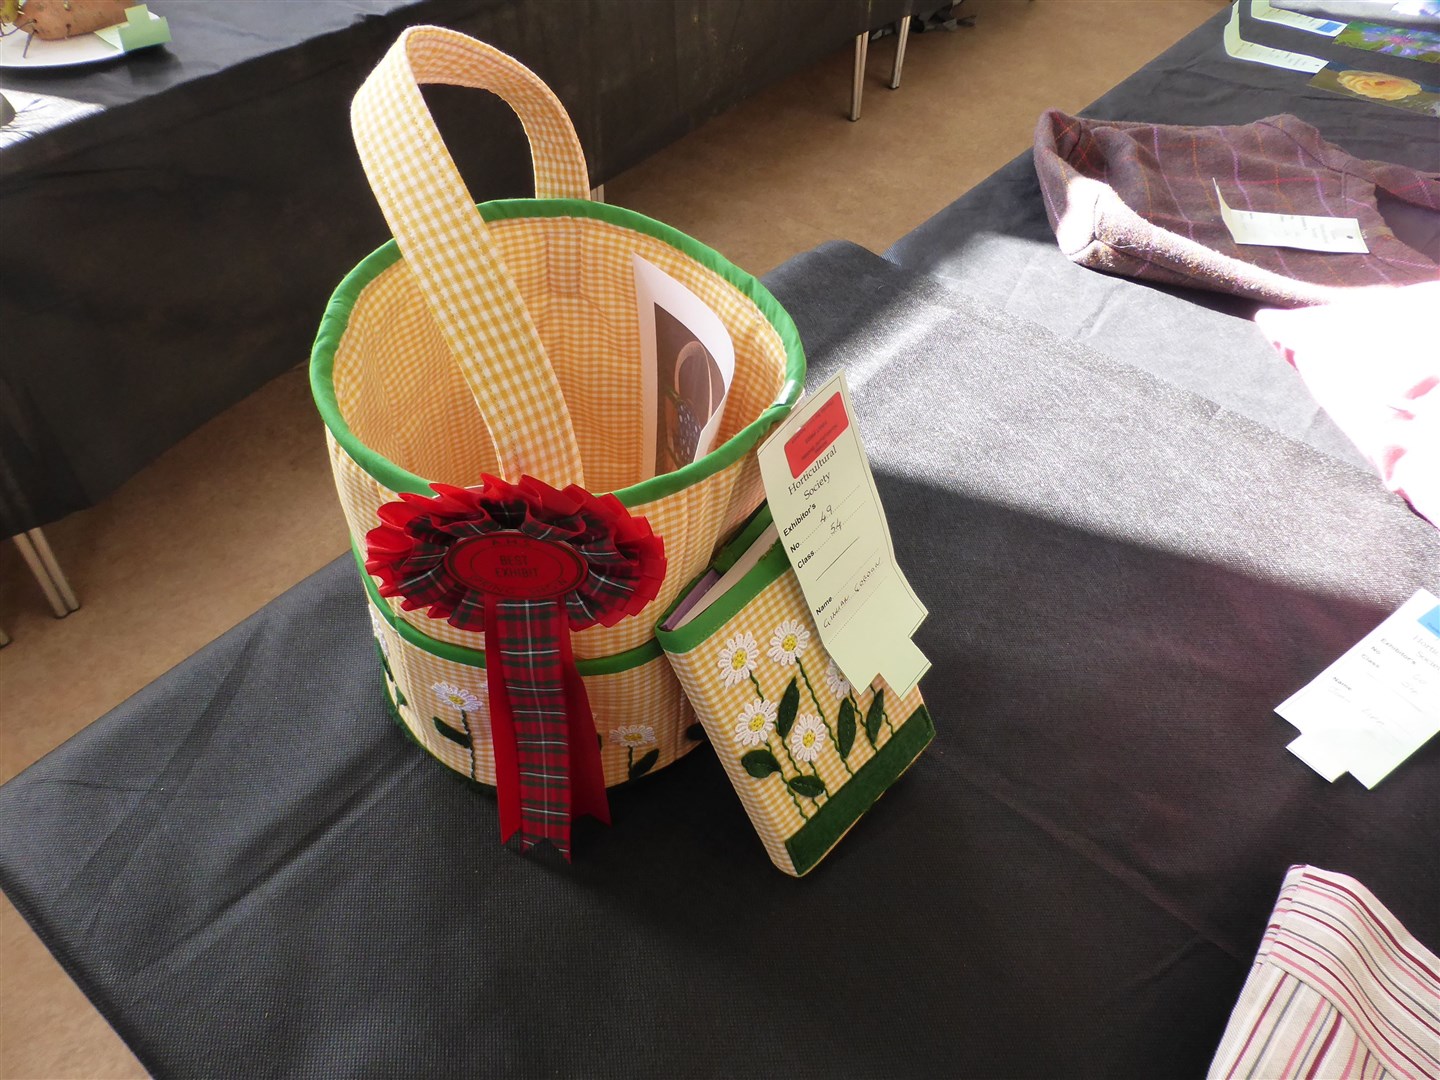 Alness Horticultural Society's Spring Show attracted a high quality of exhibits.